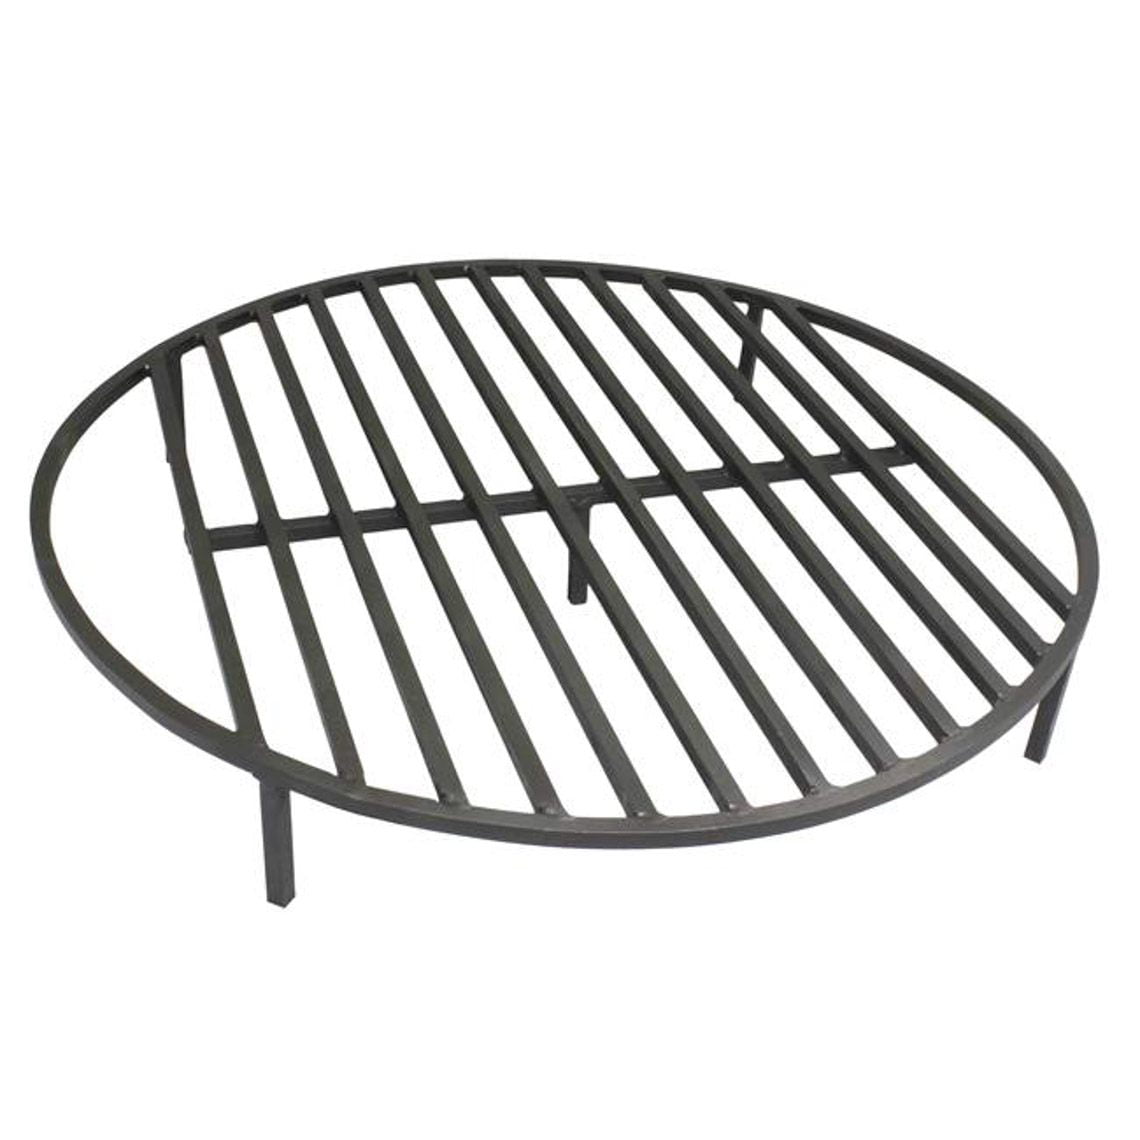 Heavy Duty Grill Cooking Campfire, Titan Fire Pit Ring